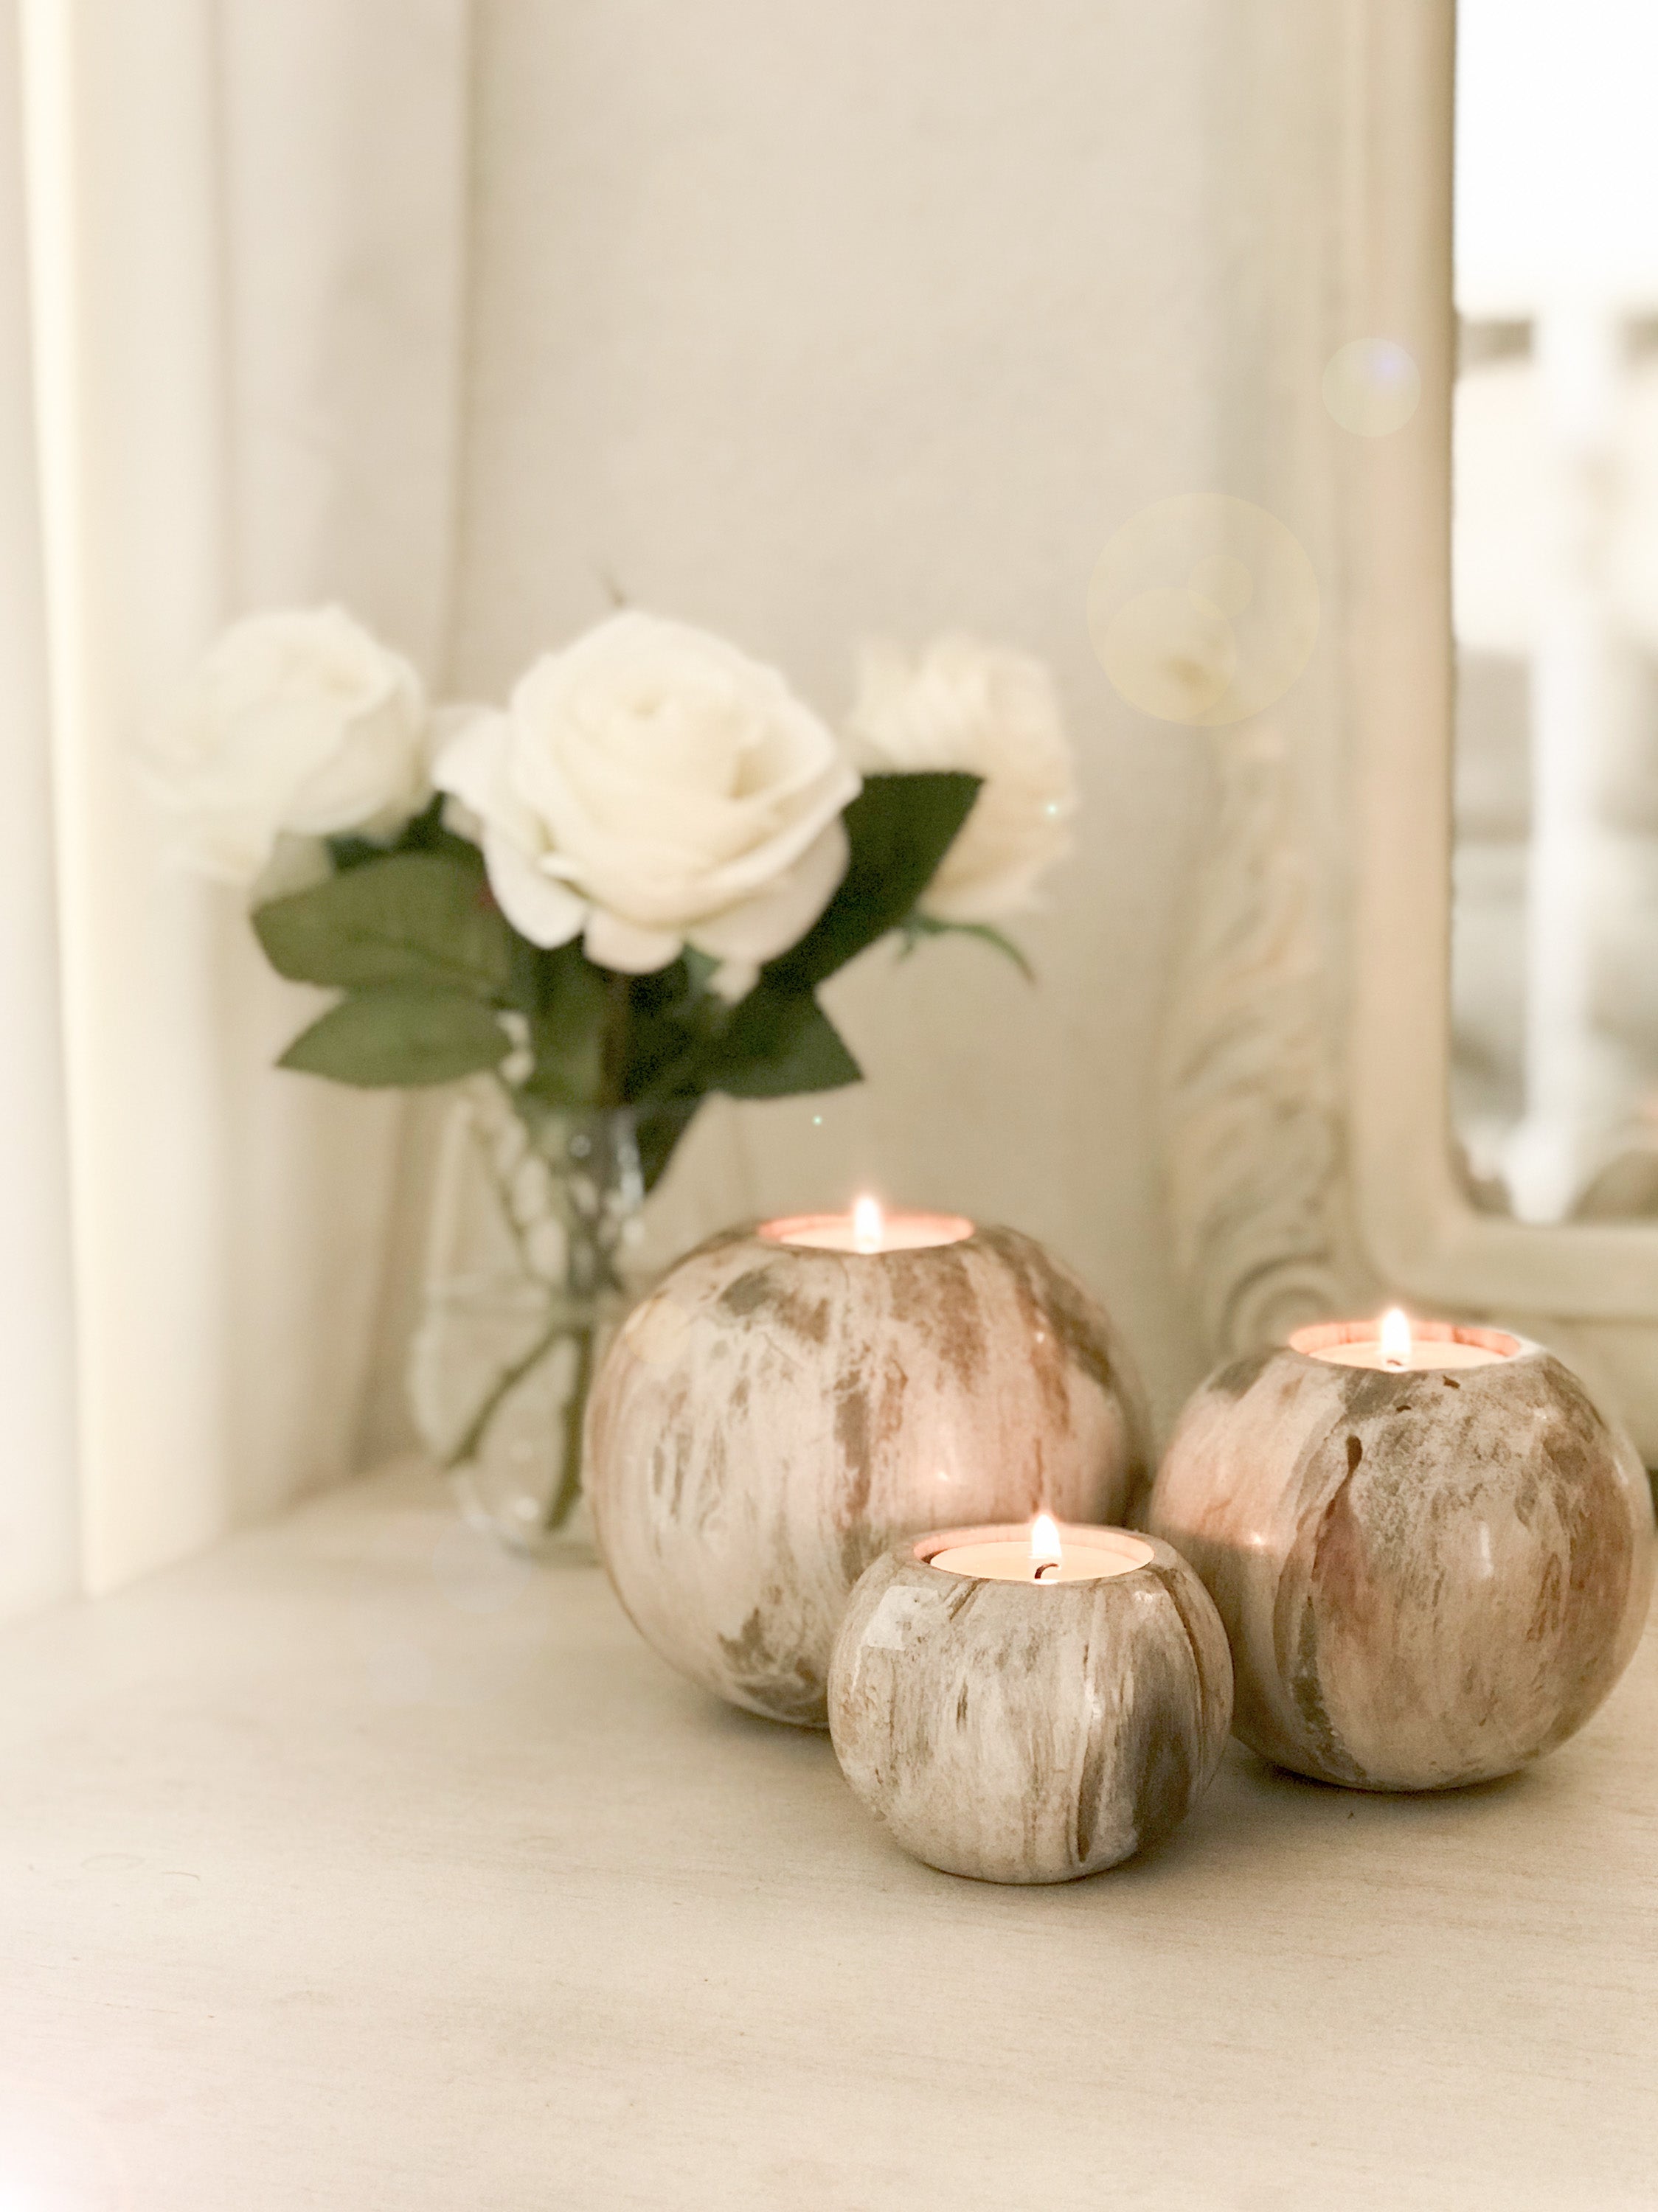 Set of 3 round reversible candle holders in petrified wood